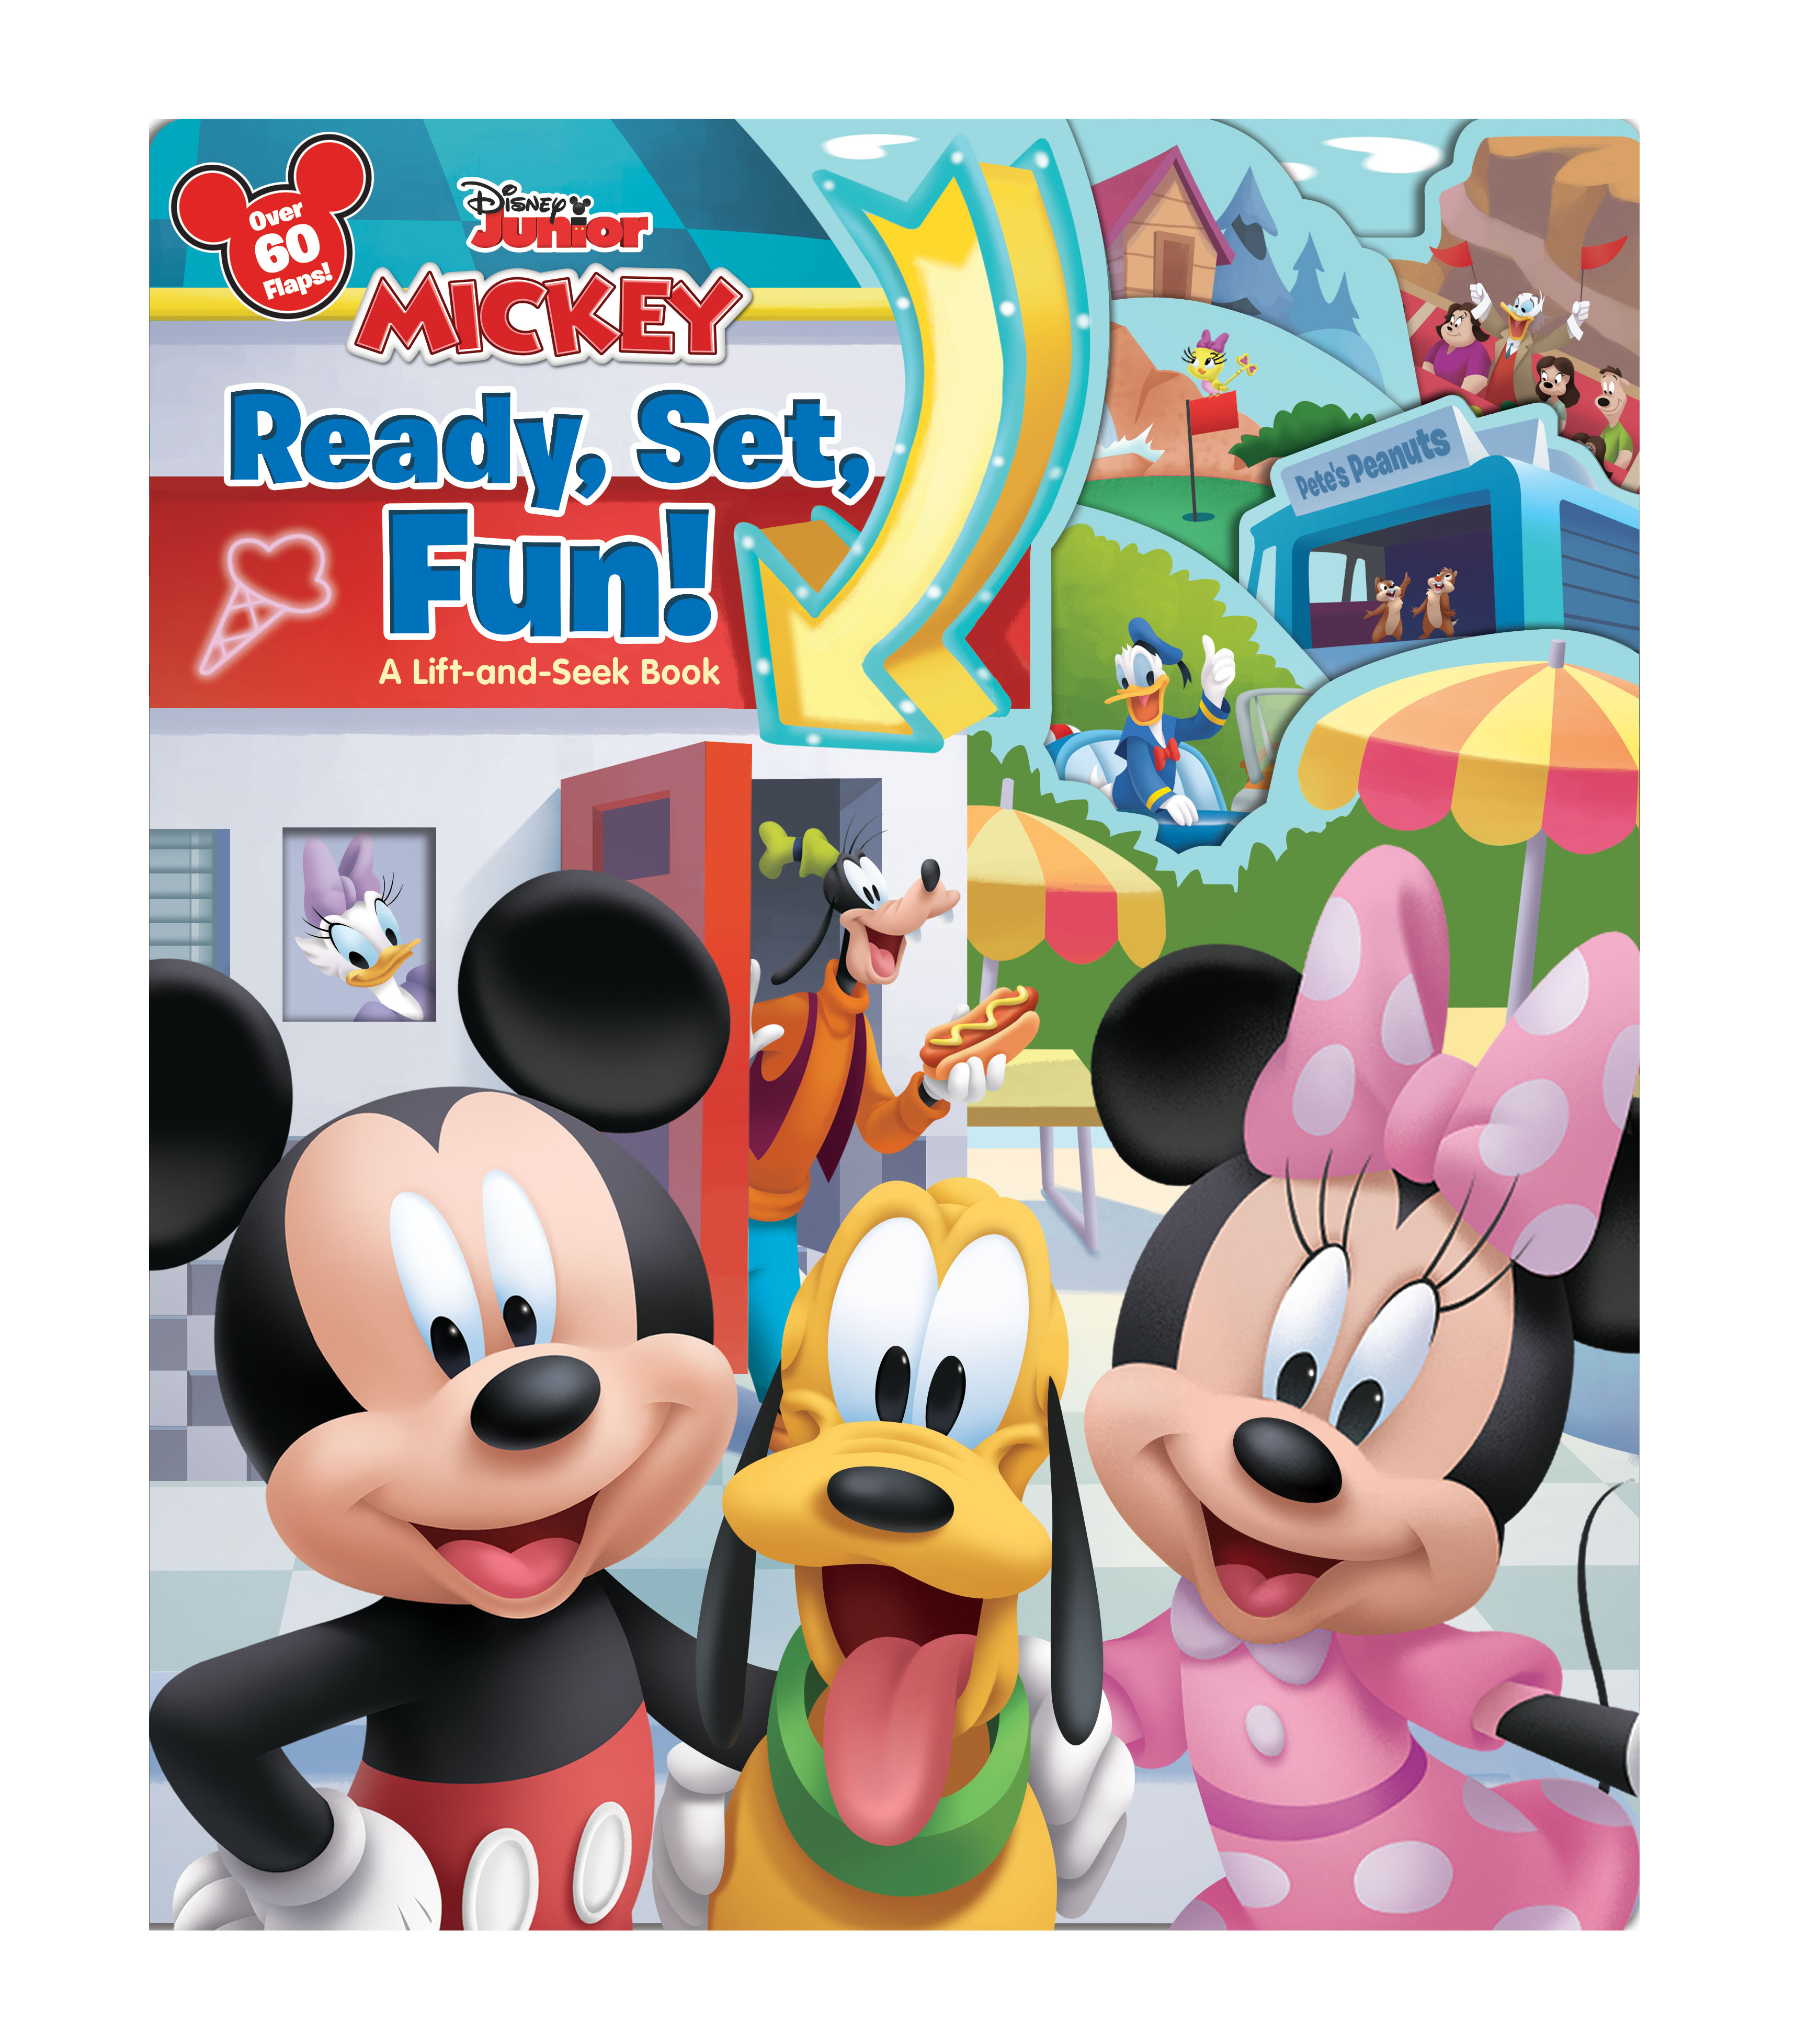 Disney Junior Mickey Mouse Clubhouse: 12 Board Books (Boxed Set)